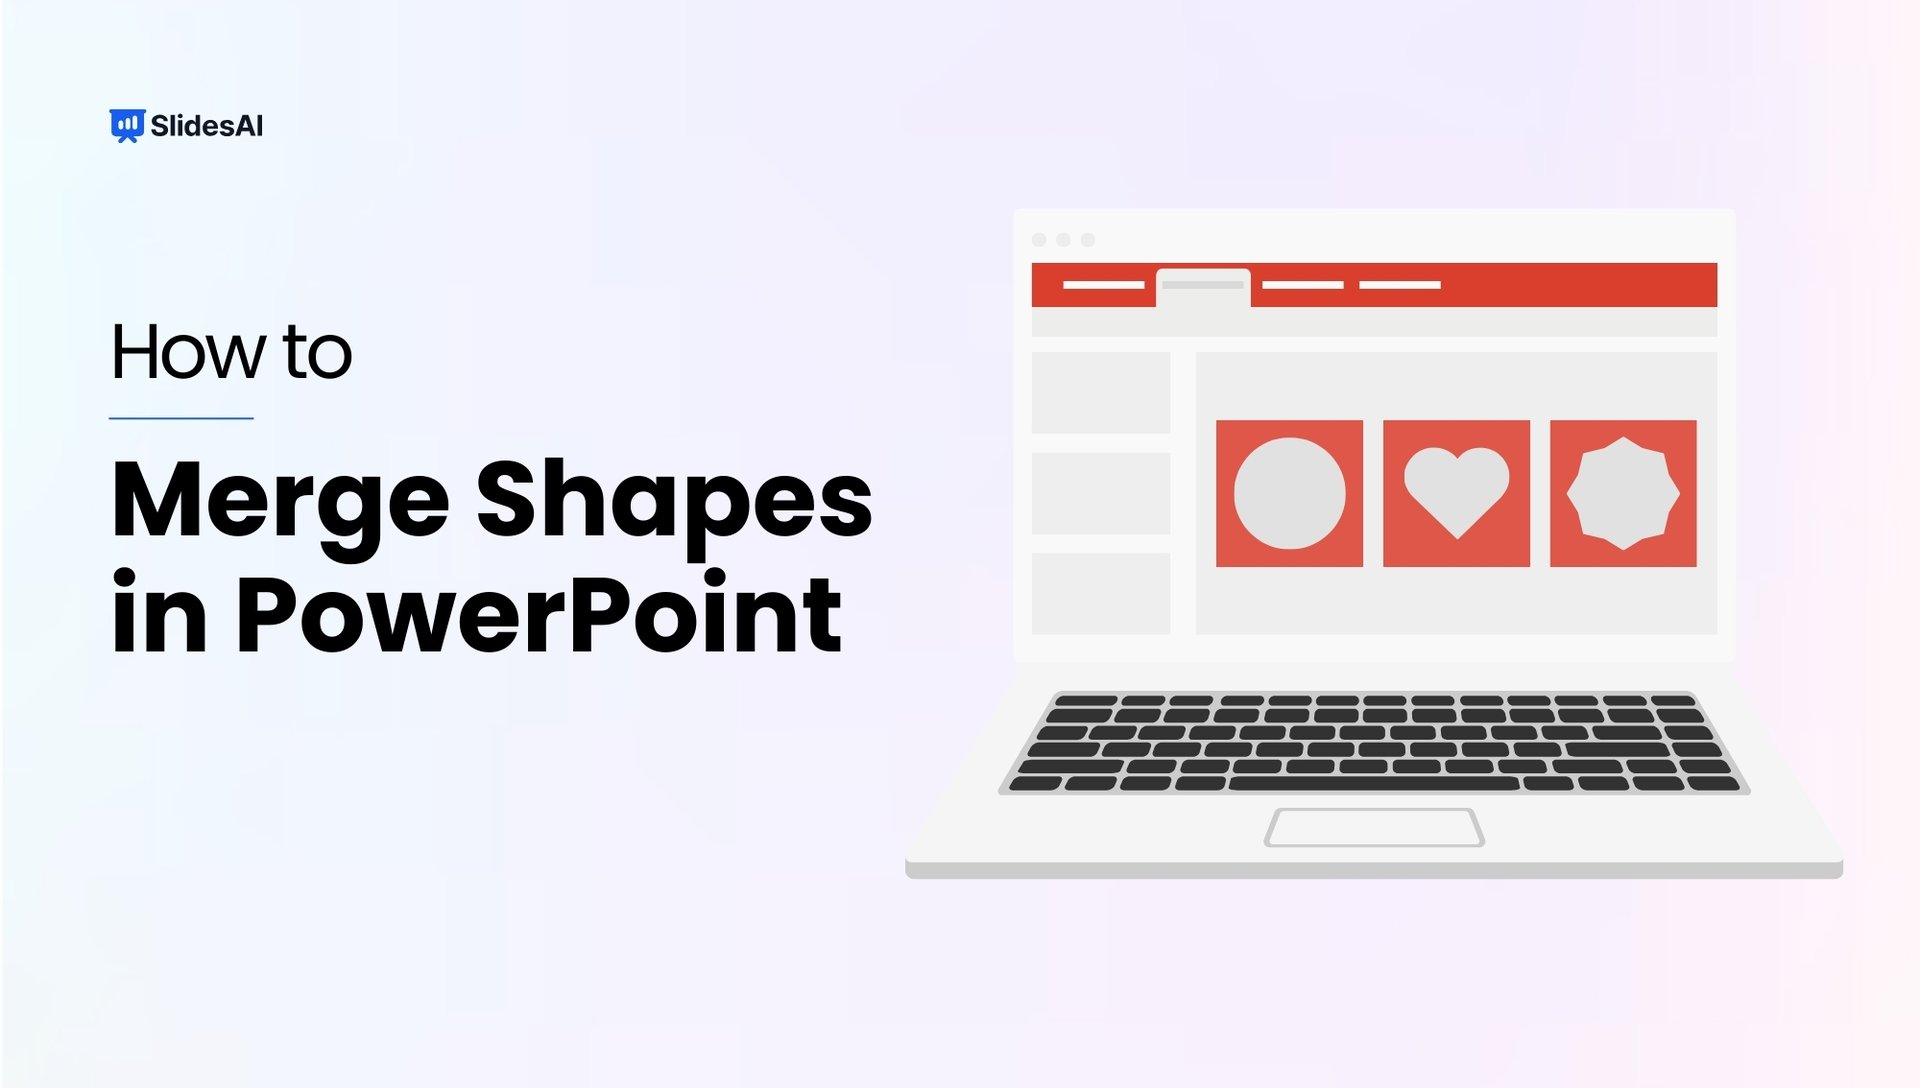 How To Merge Shapes In PowerPoint: A Step-by-Step Guide